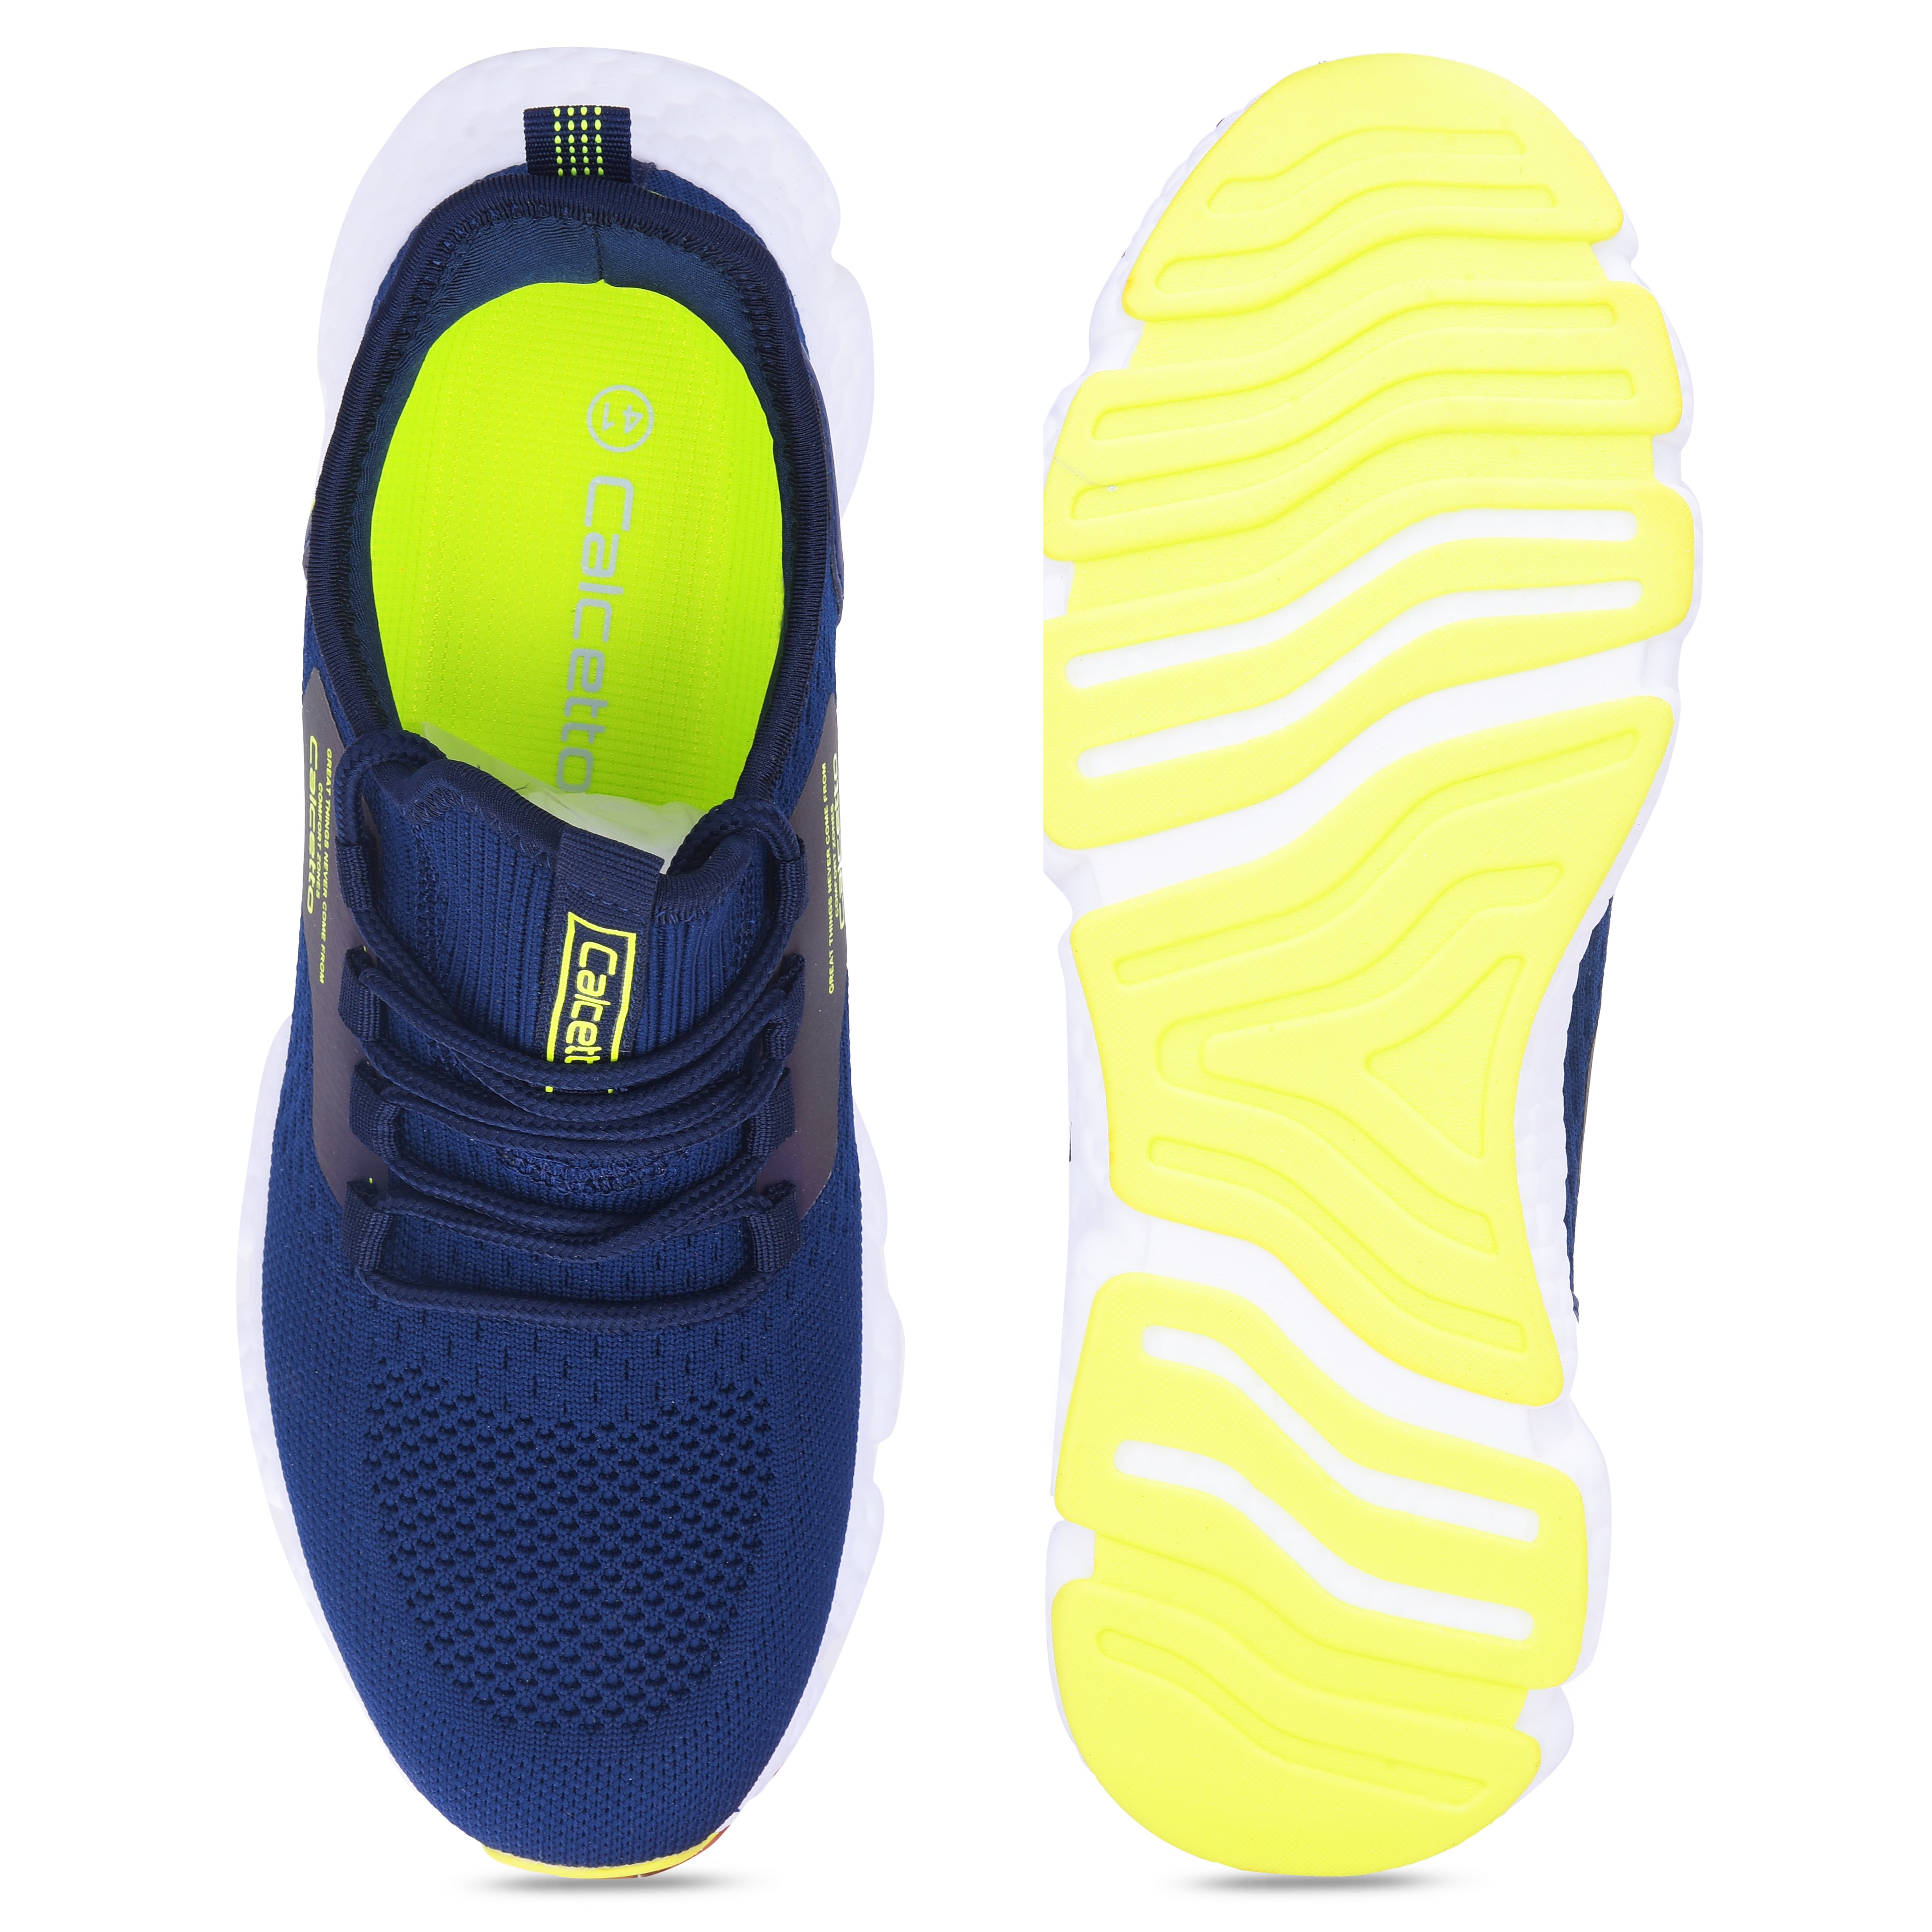 Calcetto CLT-0936 Navy Lime Men Casual Shoes